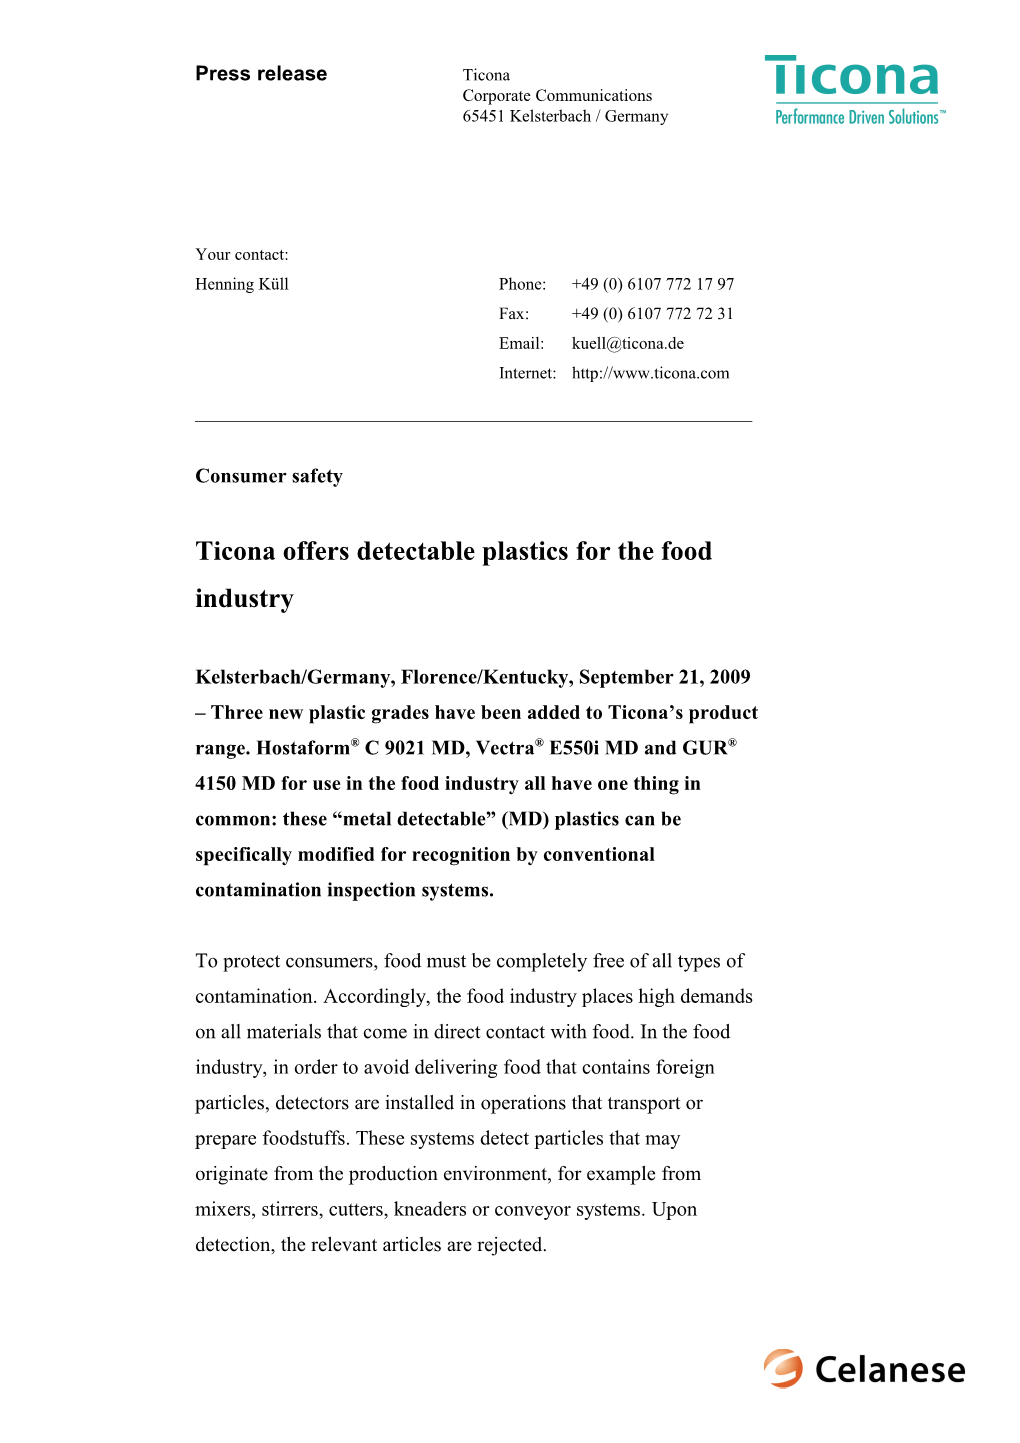 Ticona Offers Detectable Plastics for the Food Industry